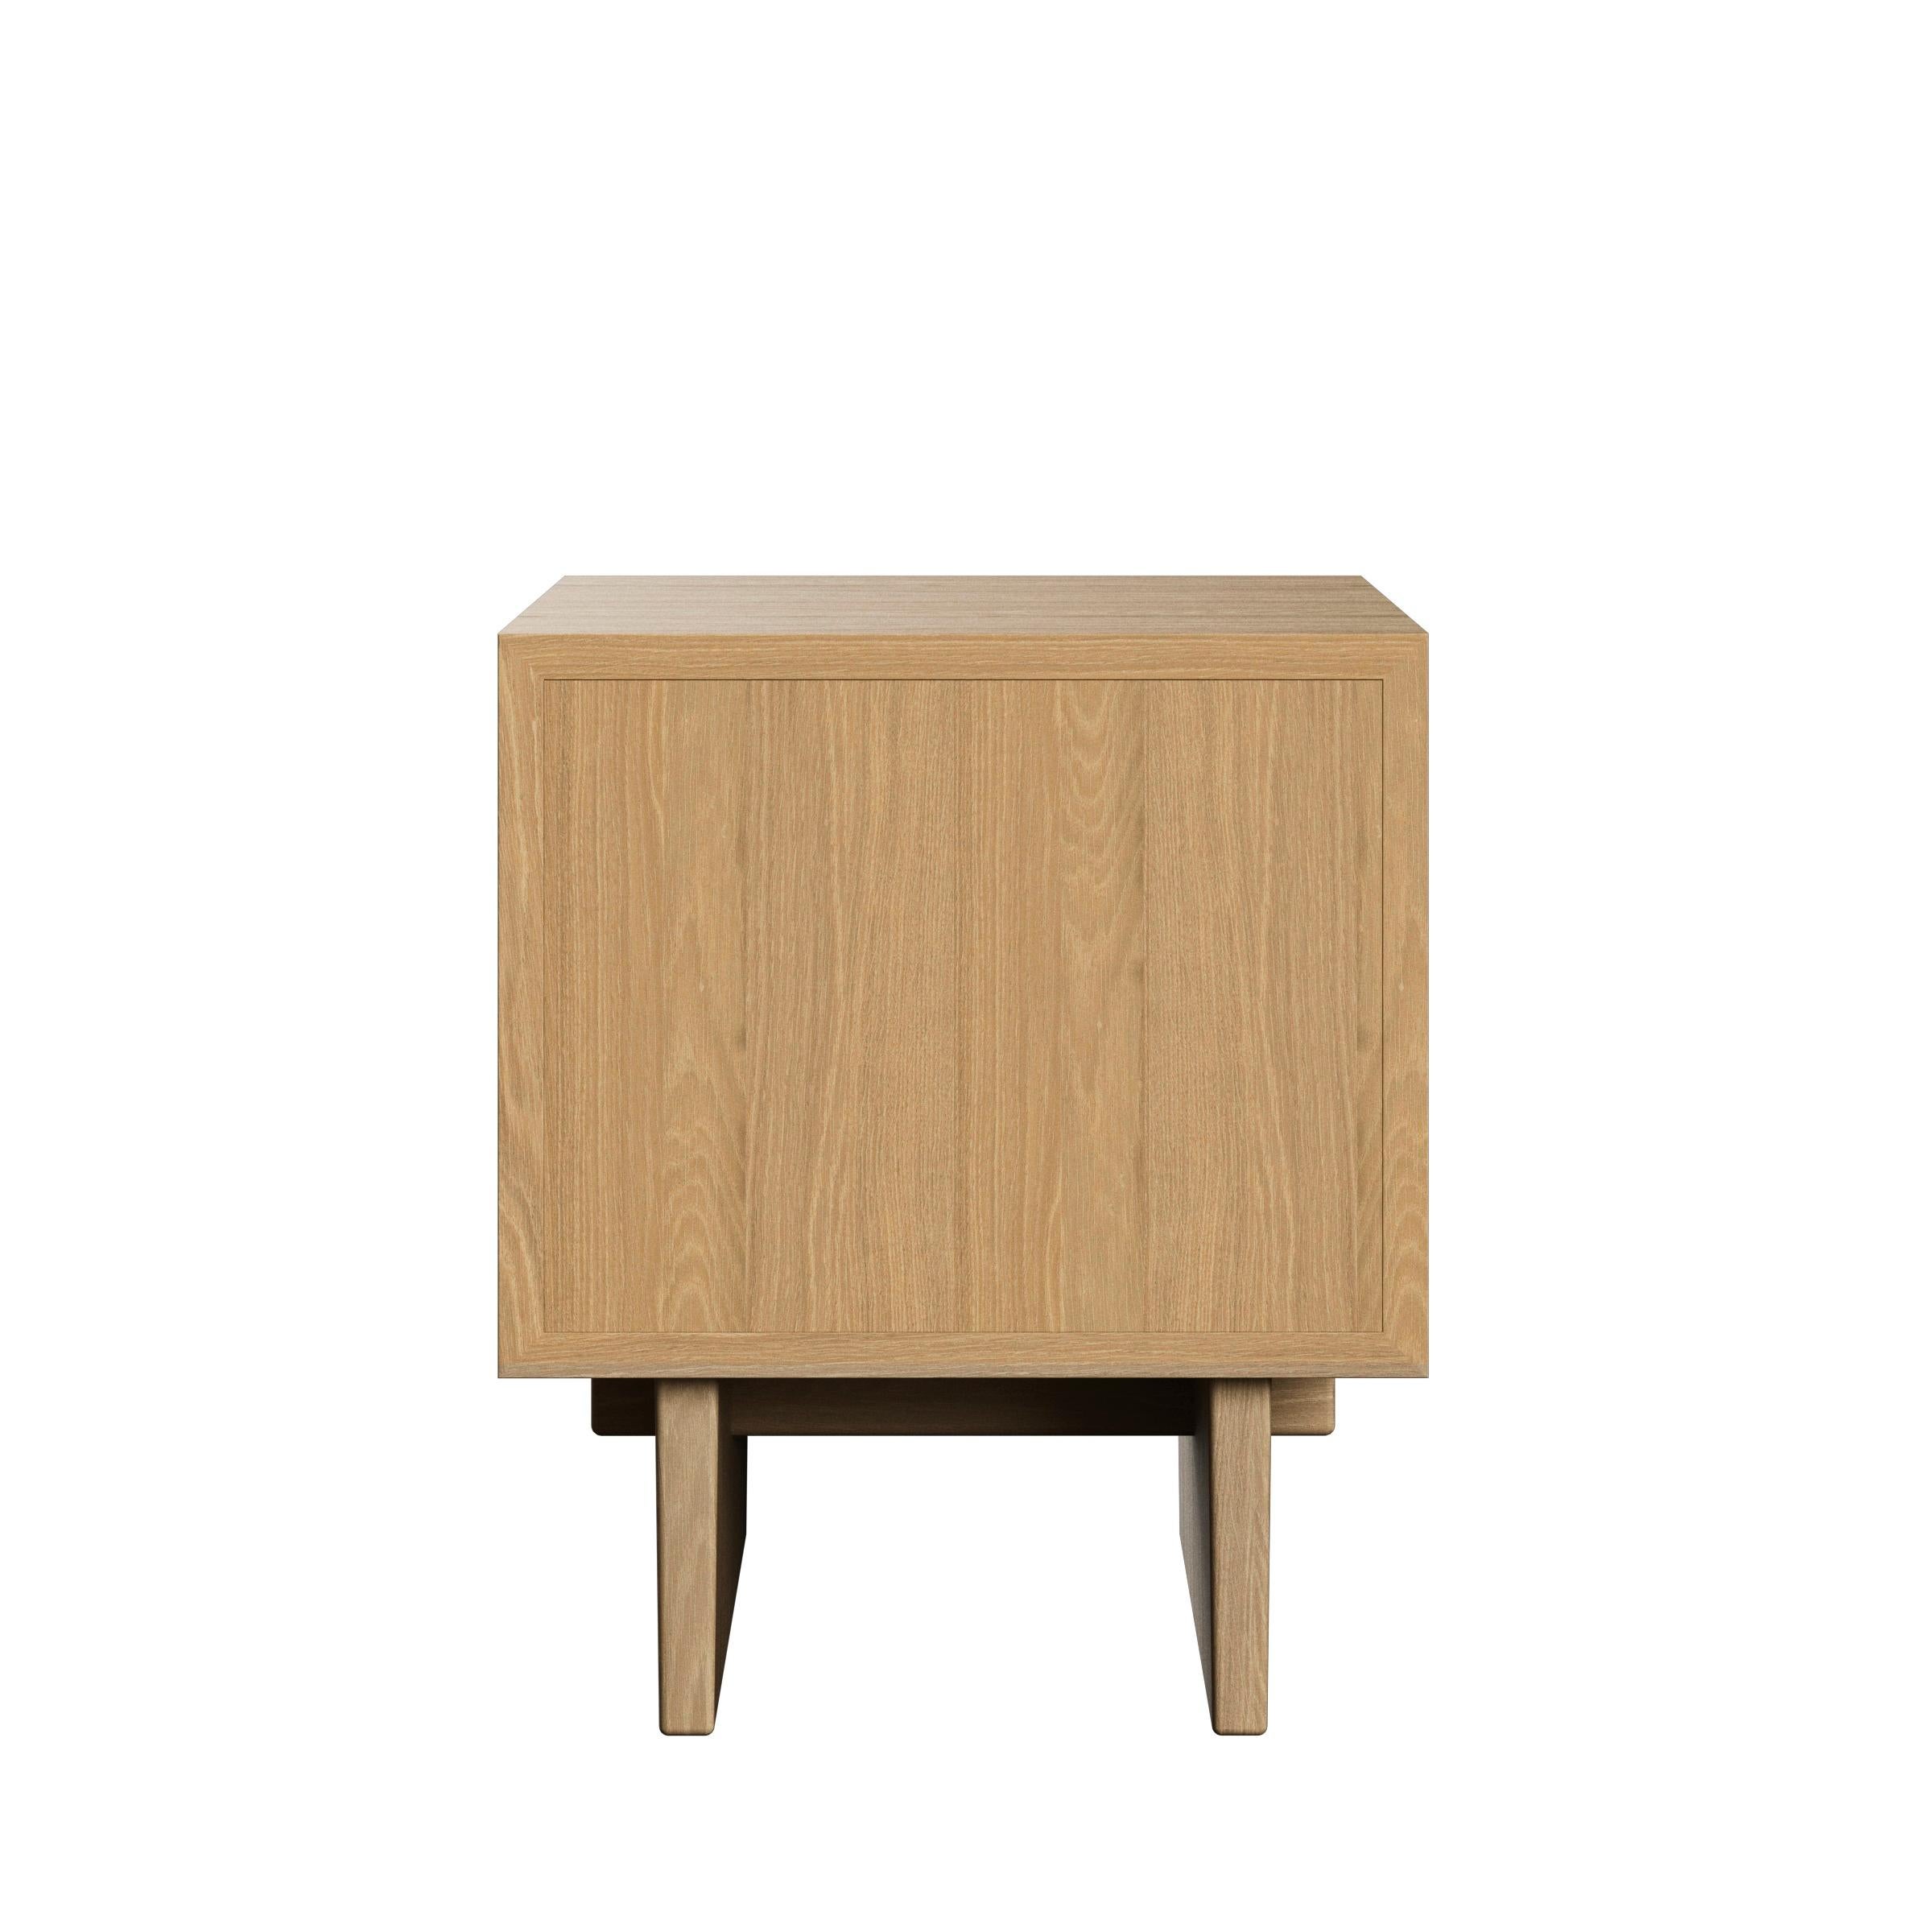 Stained 21st Century, Private Collection Light Oak Nightstand Table by Space Cophenhagen